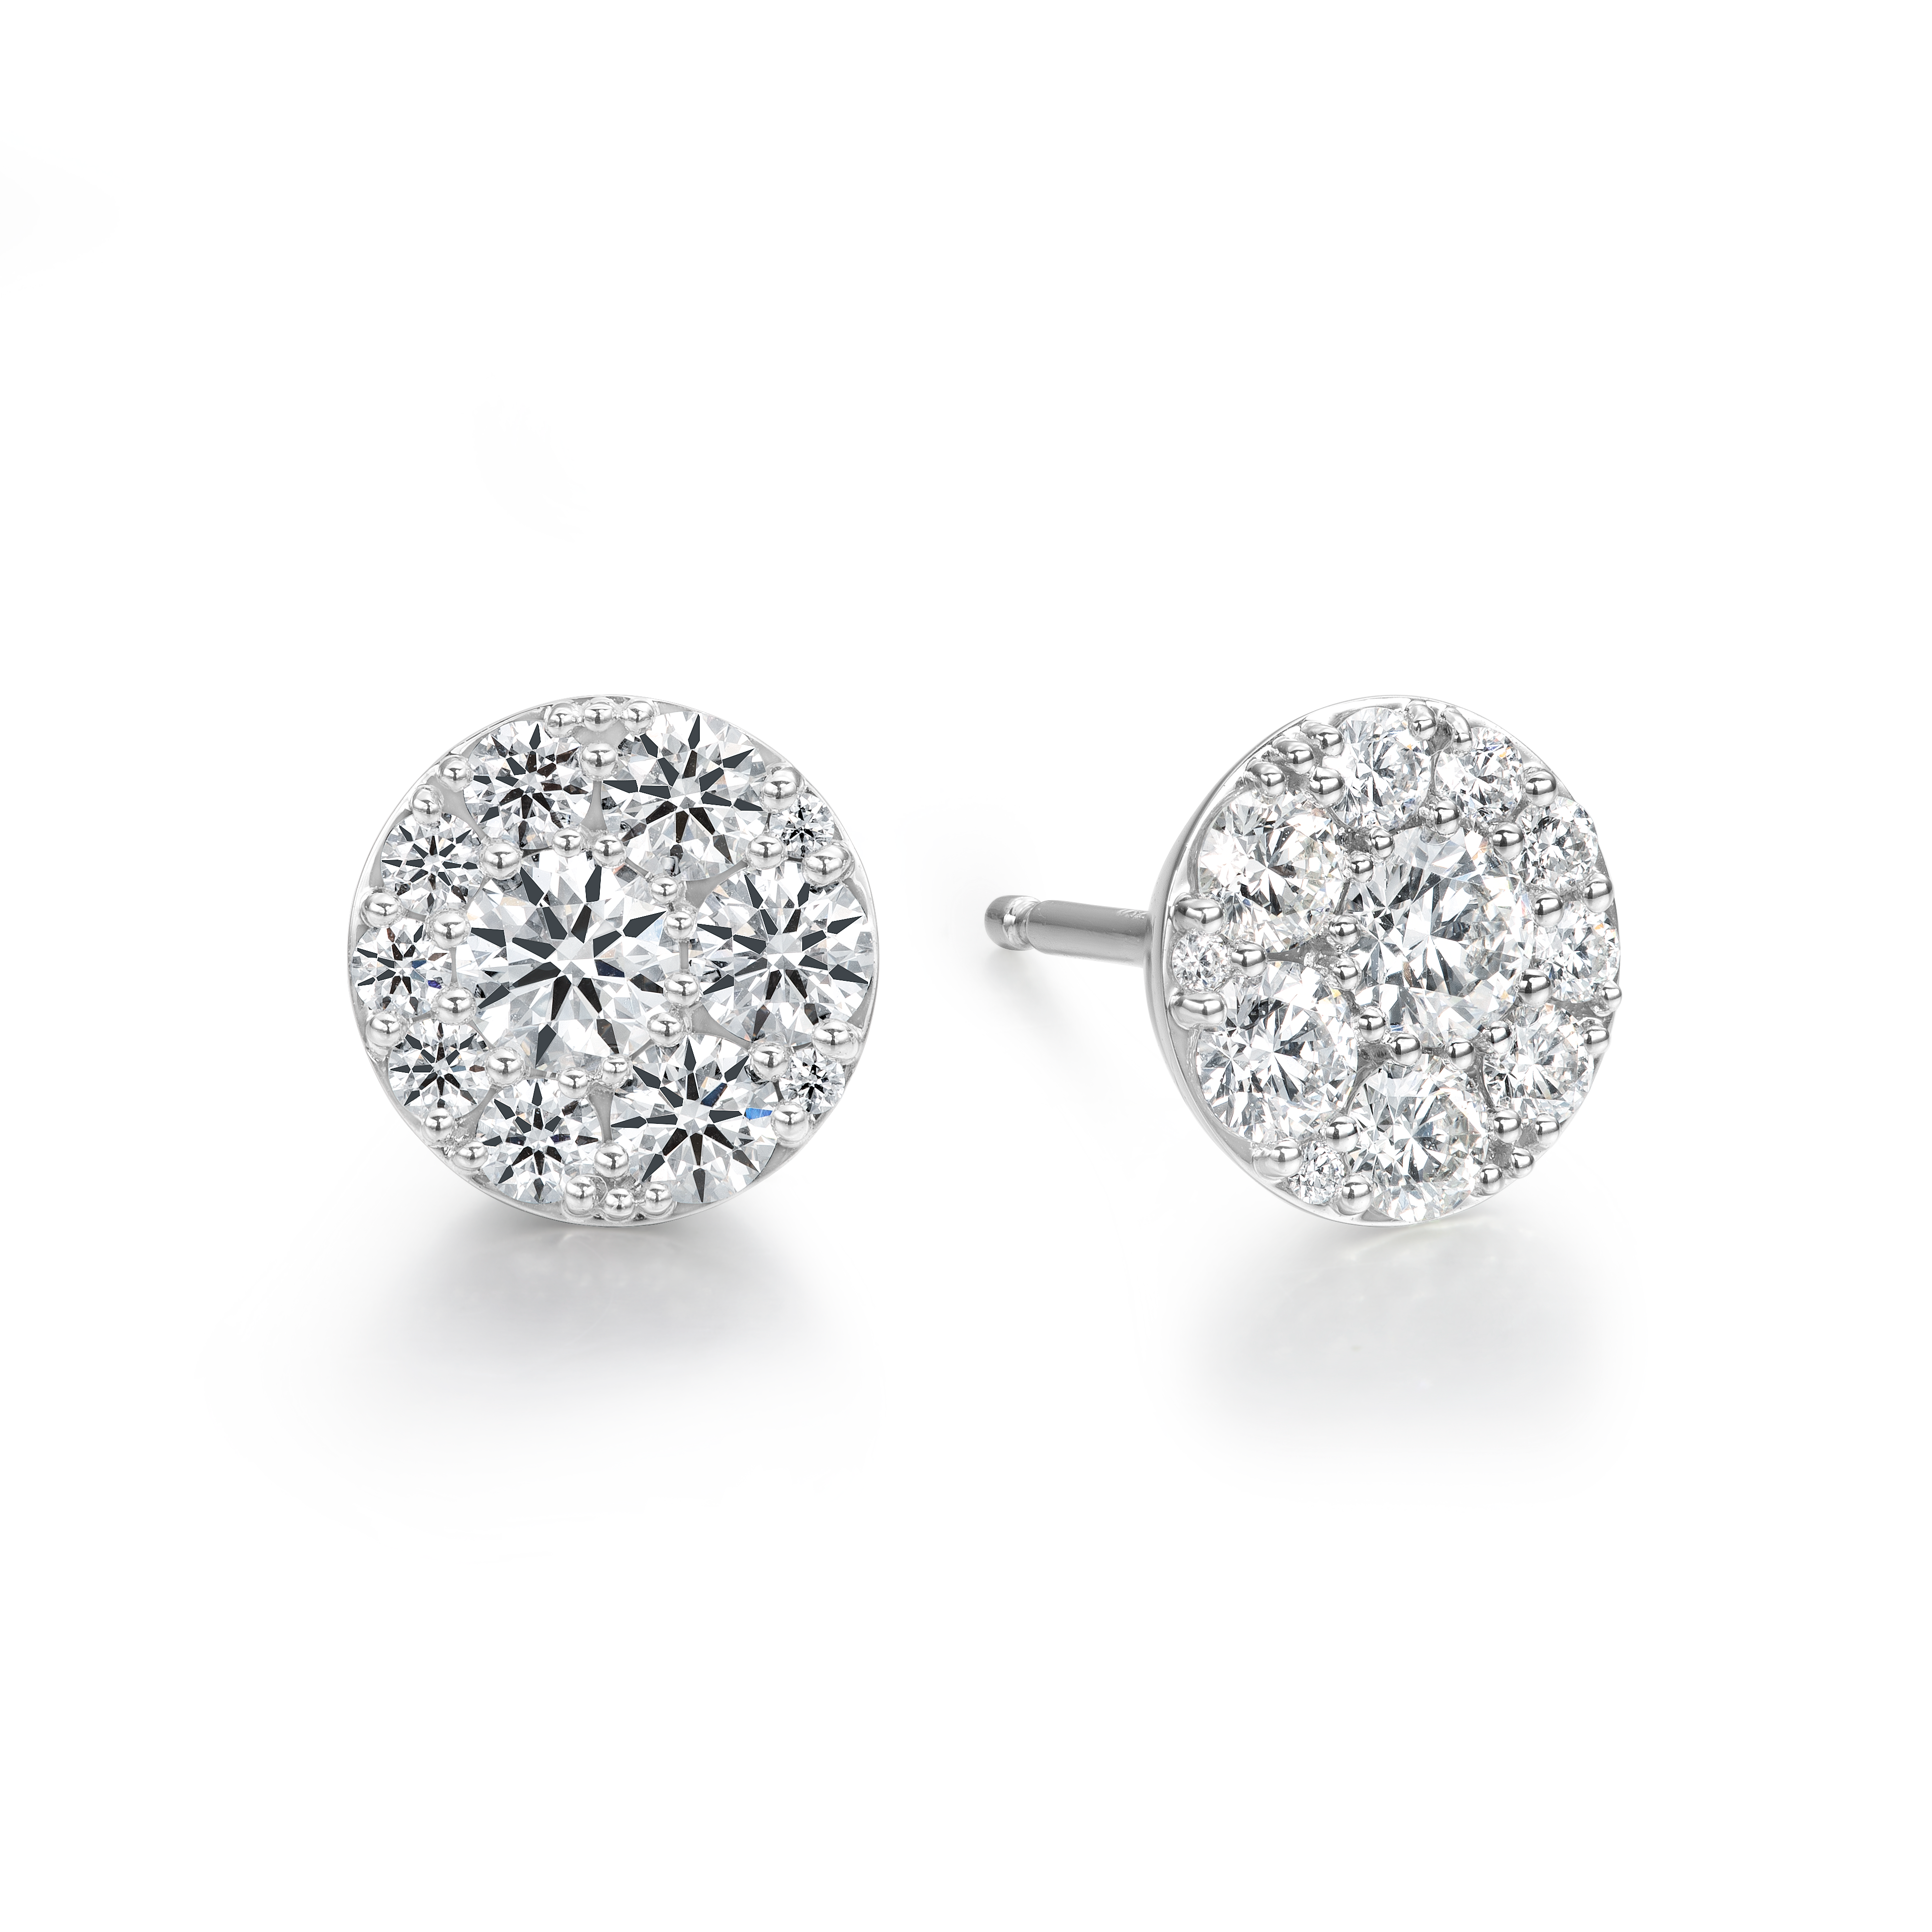 Hearts on Fire Earring Tessa Circle 18k White Gold and Diamond Cluster Studs - 2.00cttw